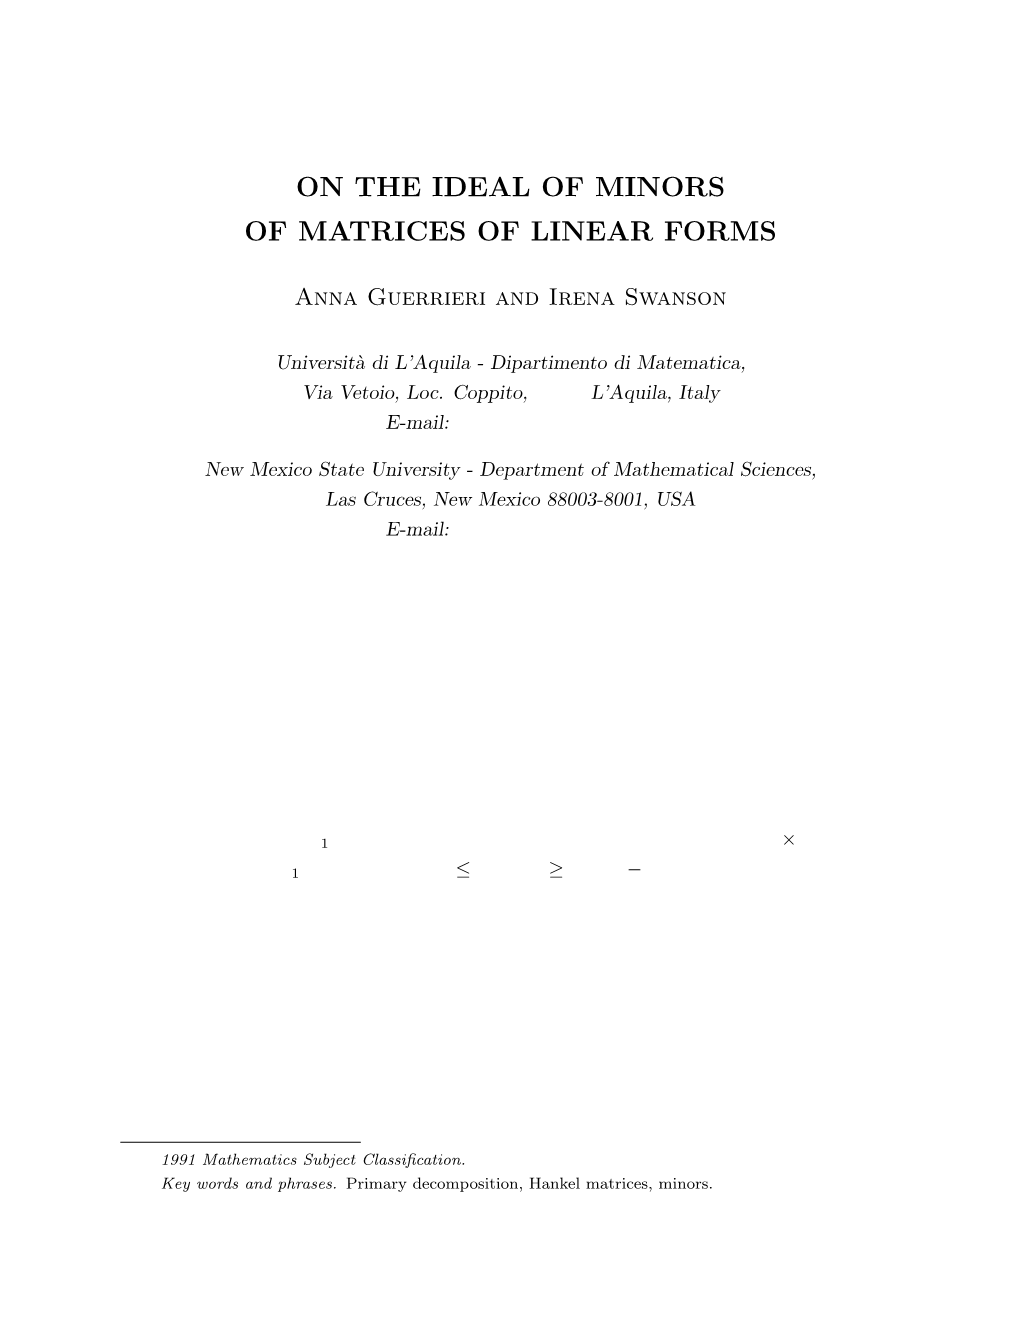 On the Ideal of Minors of Matrices of Linear Forms